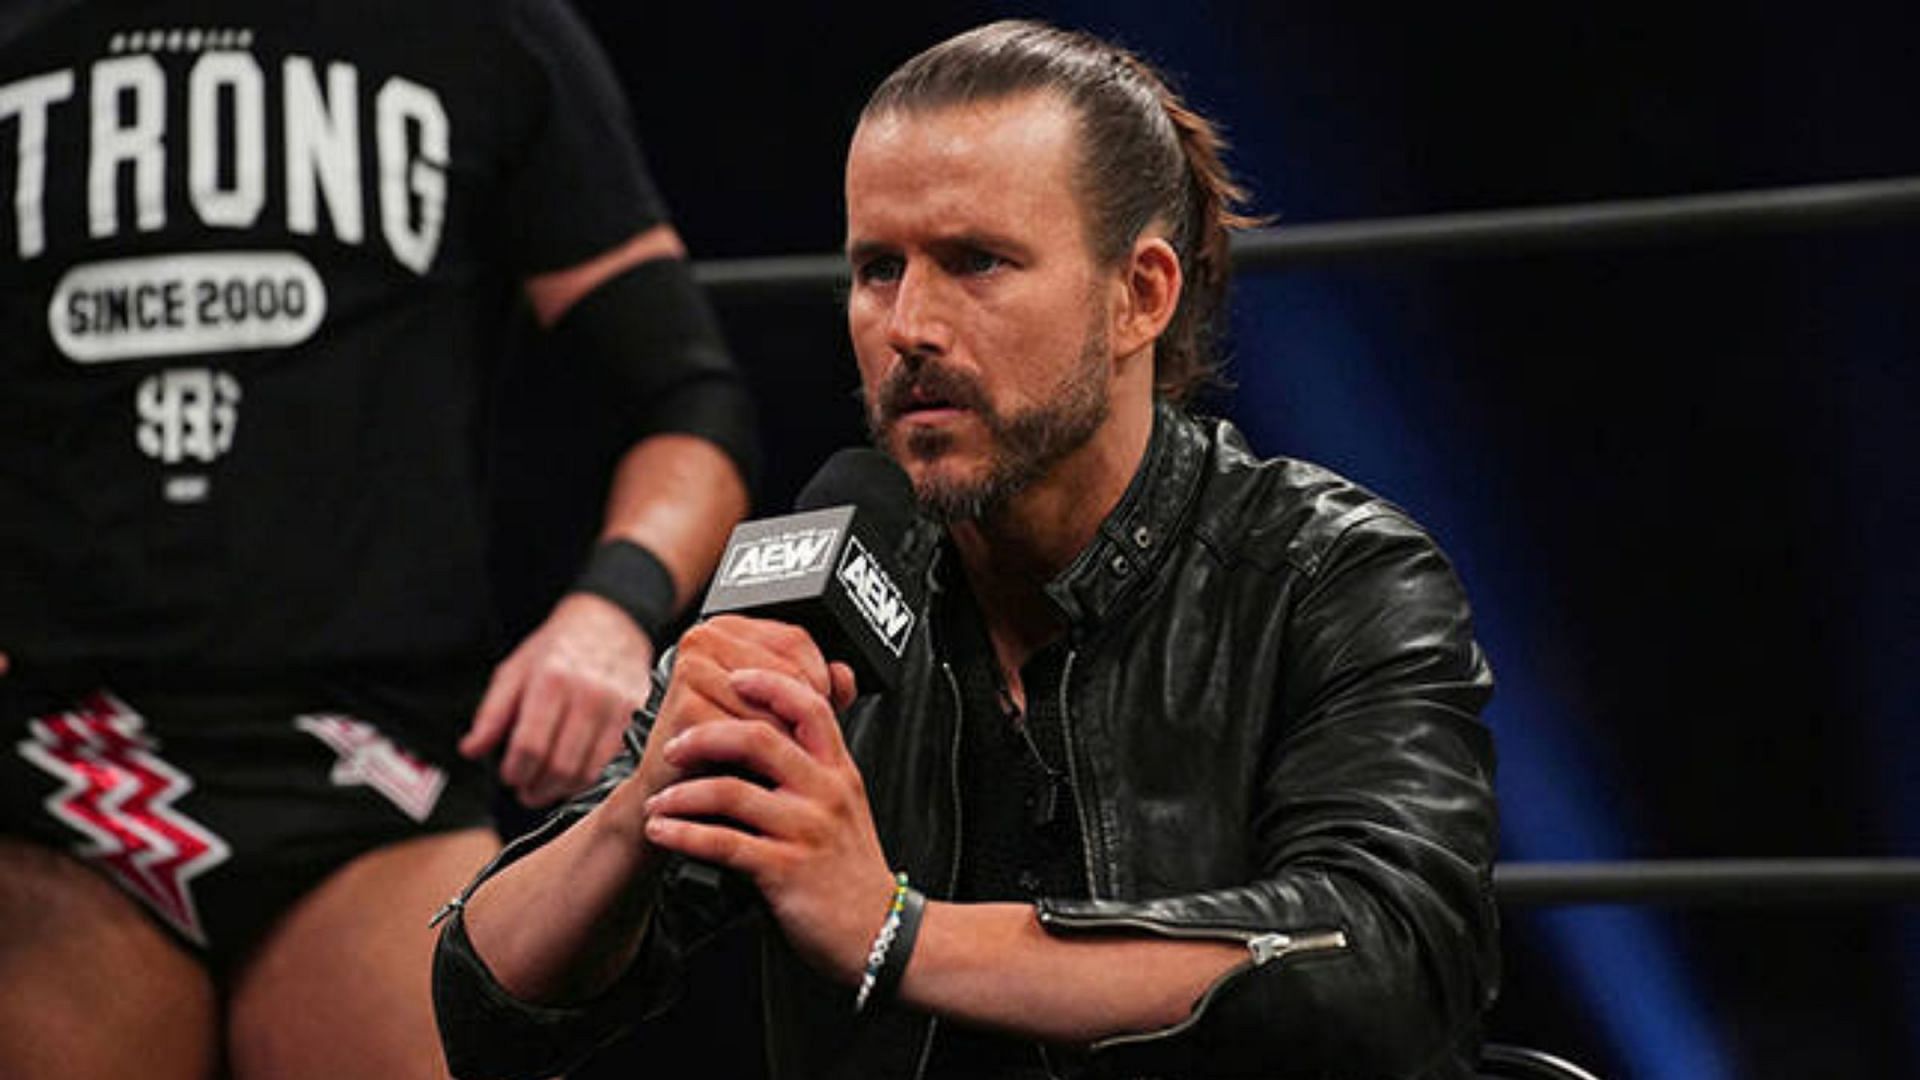 Adam Cole is a former NXT Champion now with AEW